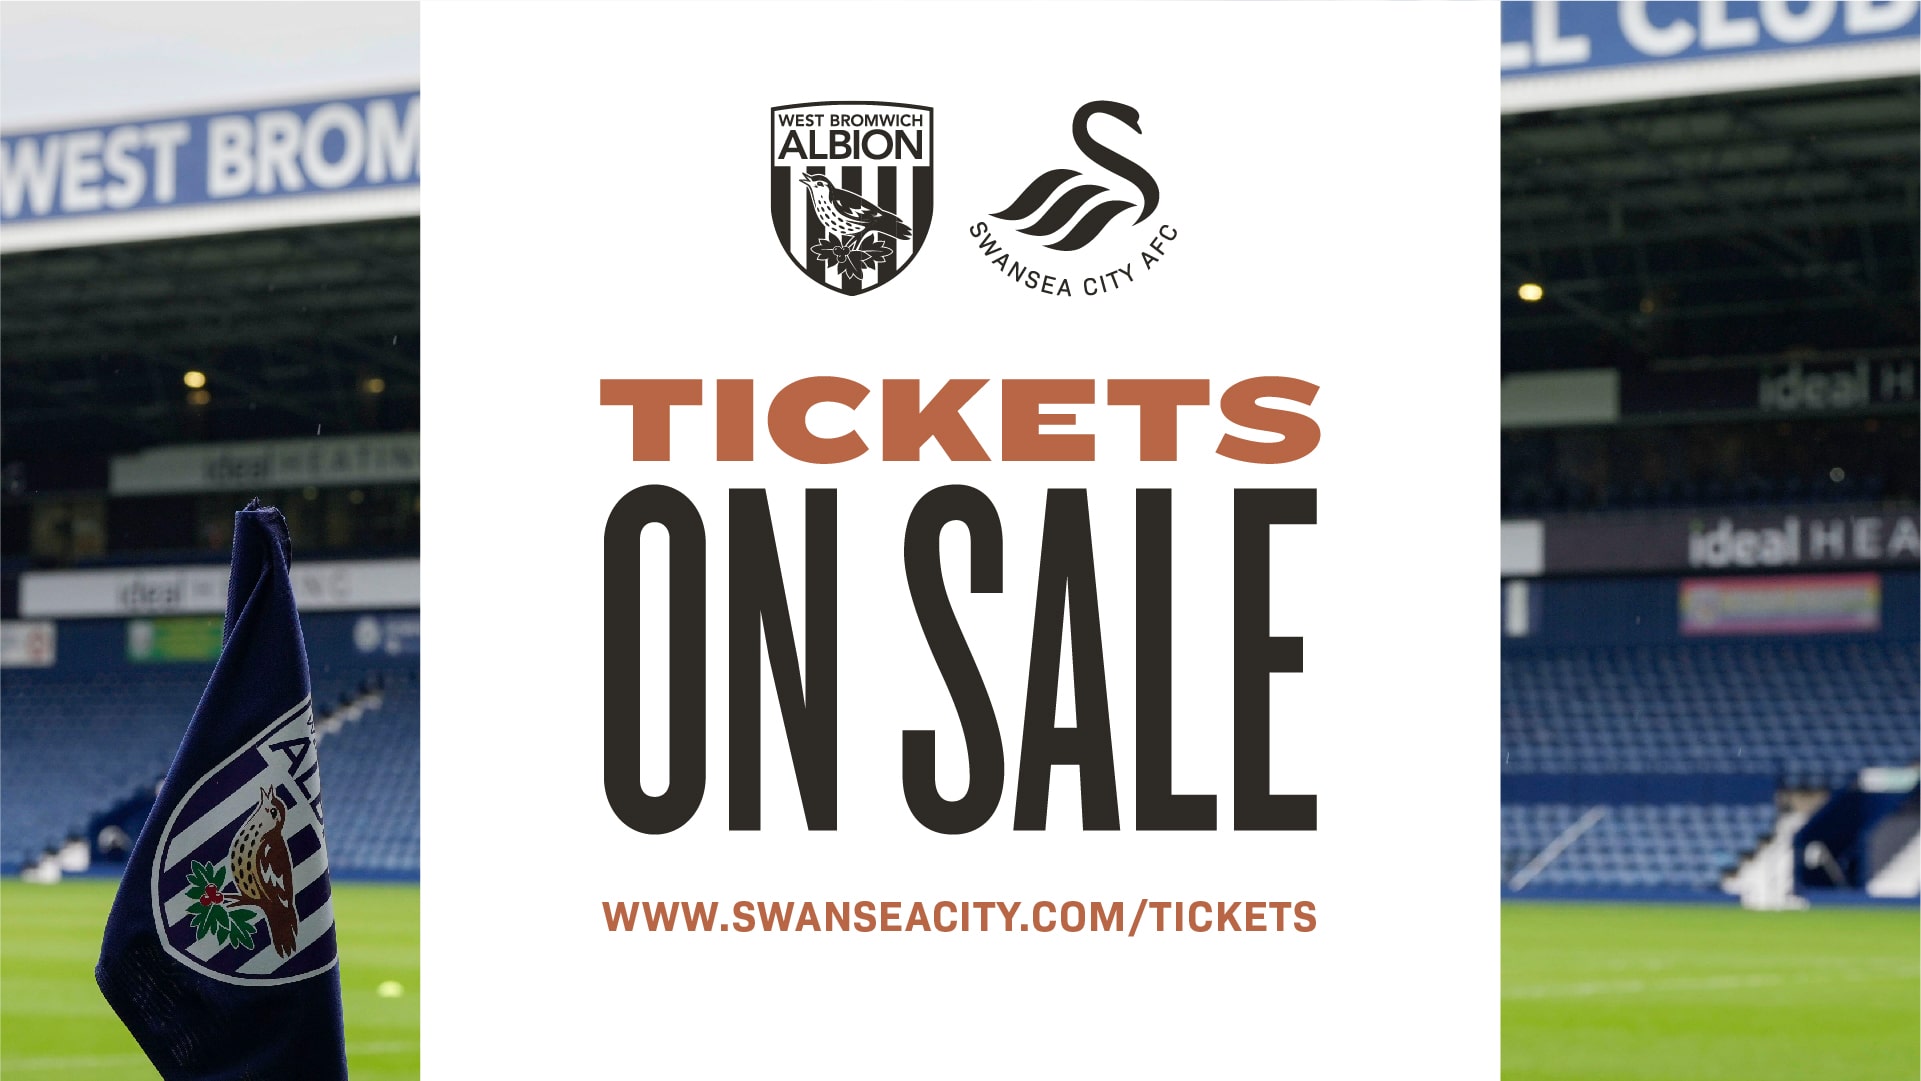 Tickets on sale for West Bromwich Albion 